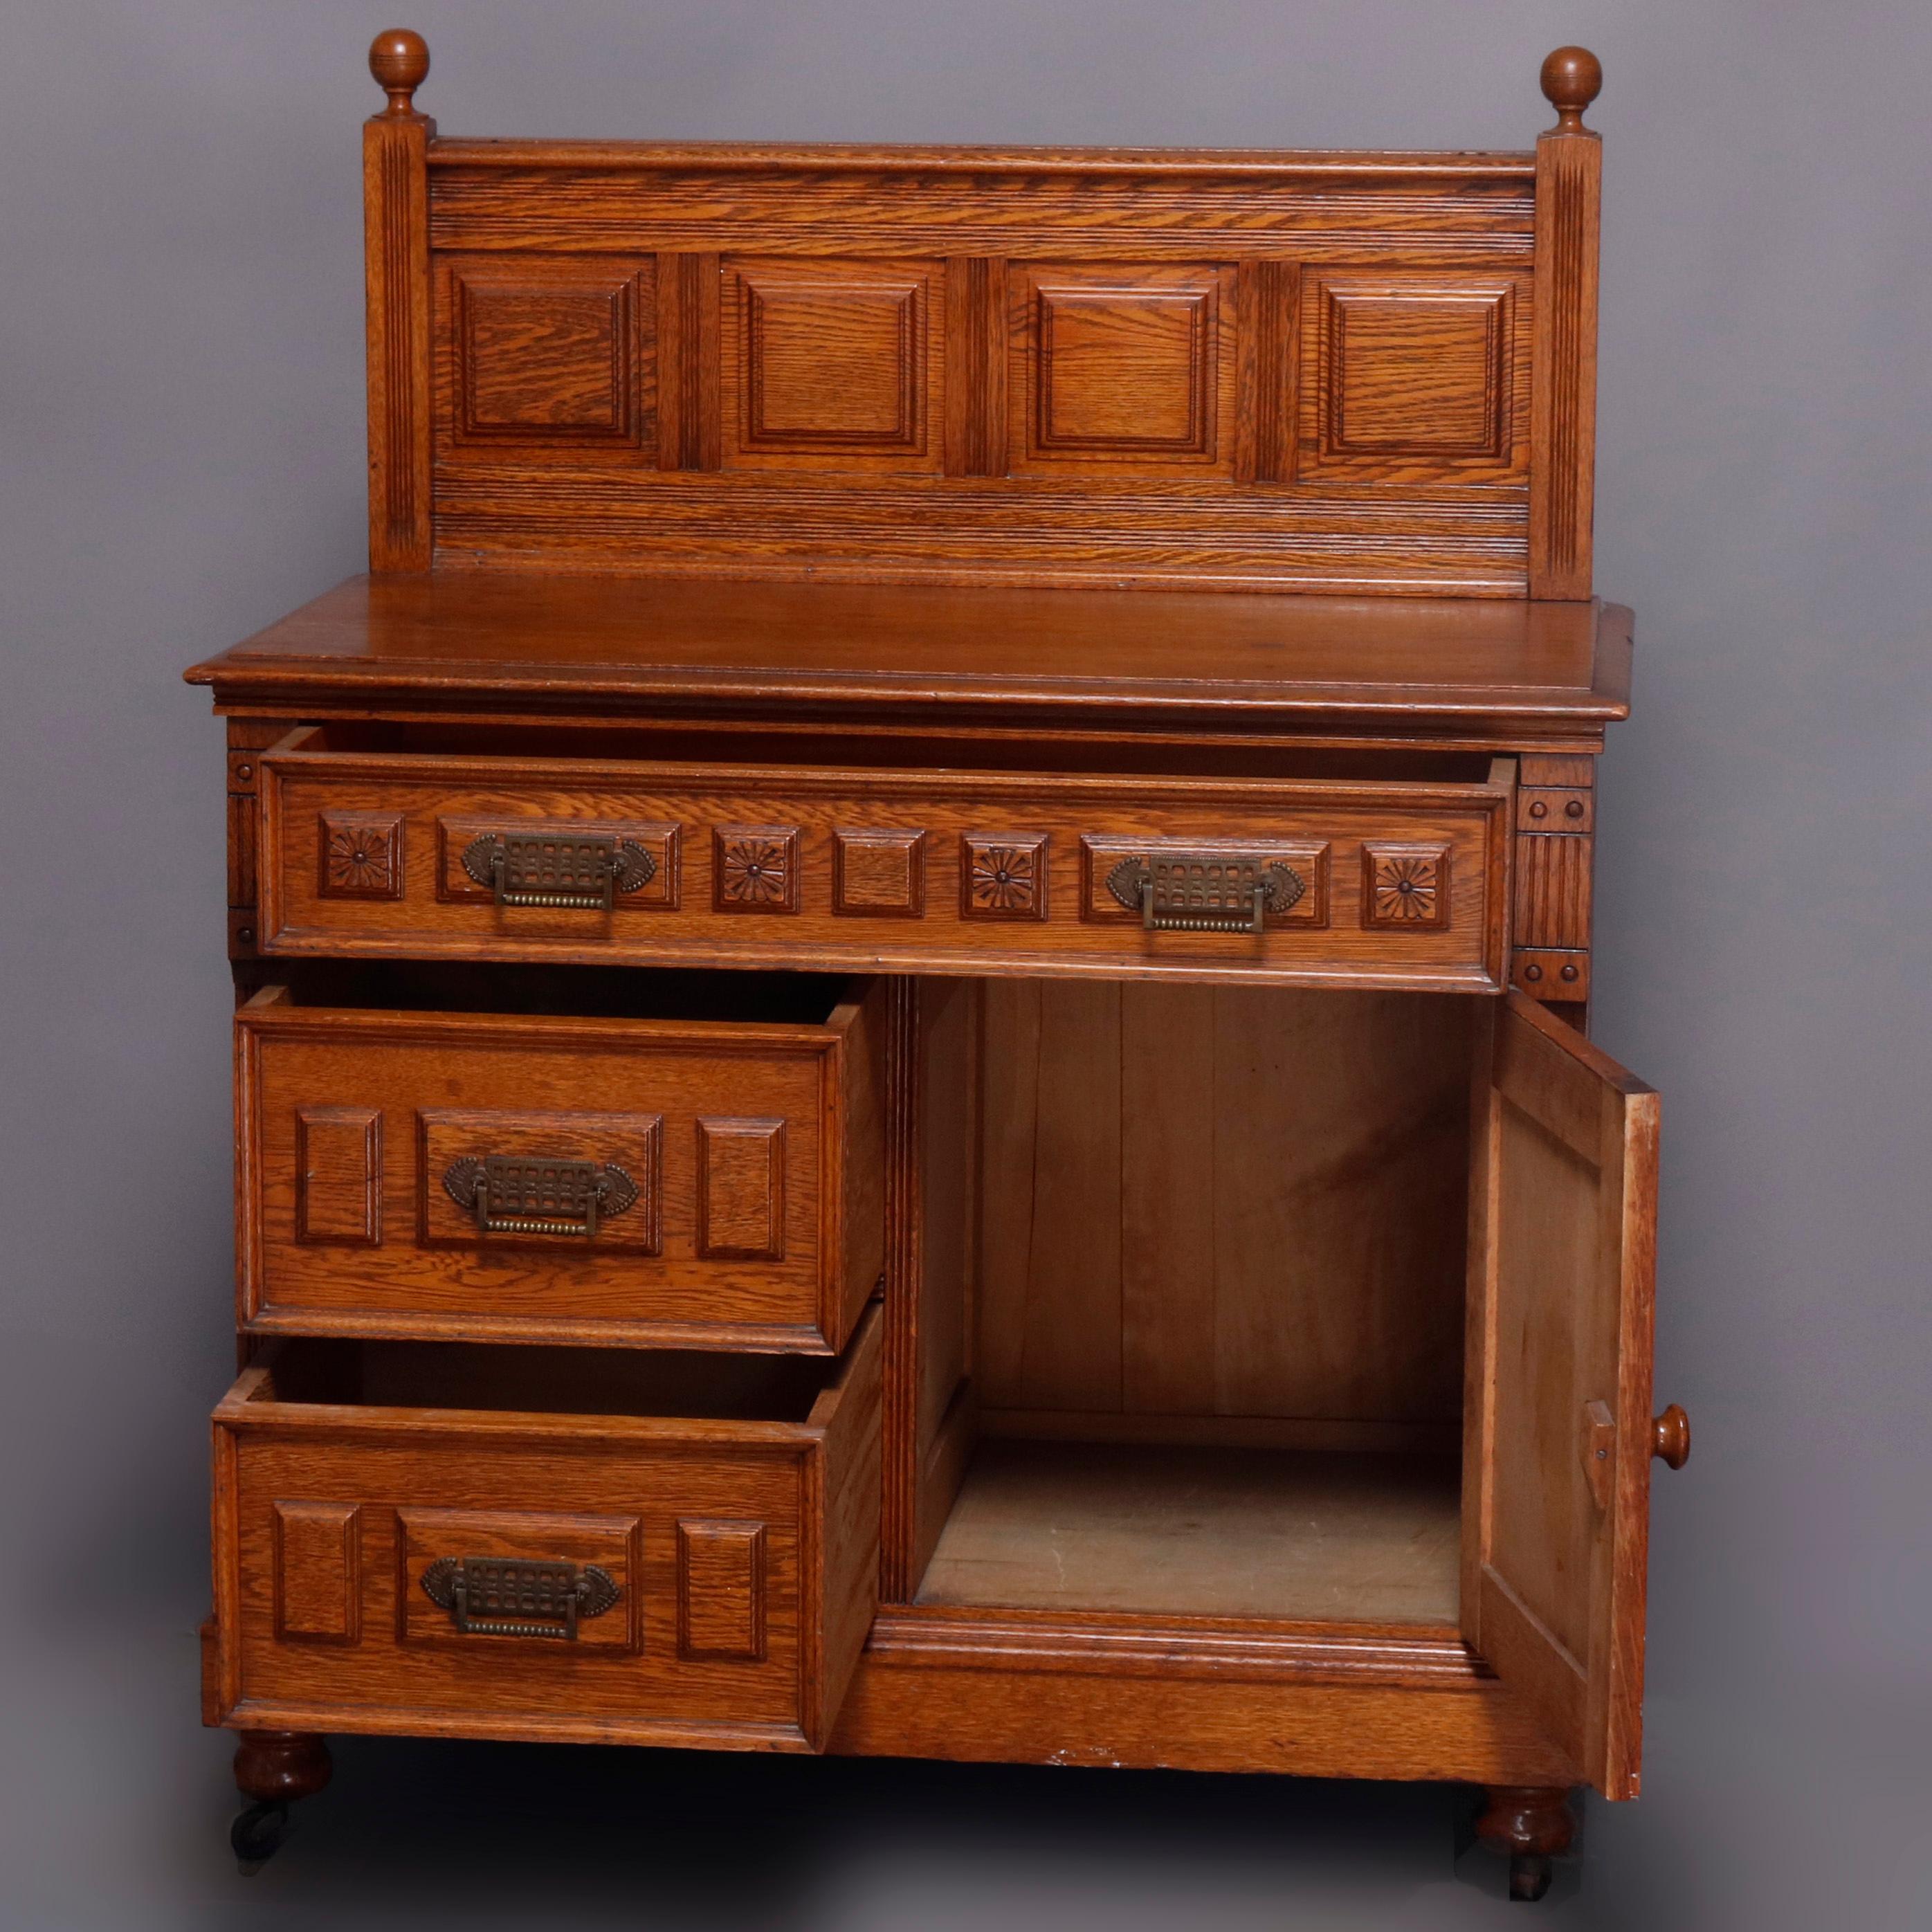 An antique Eastlake wash stand offers carved and paneled oak construction with backsplash having ball finials surmounting lower case with upper long drawer over two smaller drawers and cabinet, cast bronze pulls throughout, 19th century
Matching